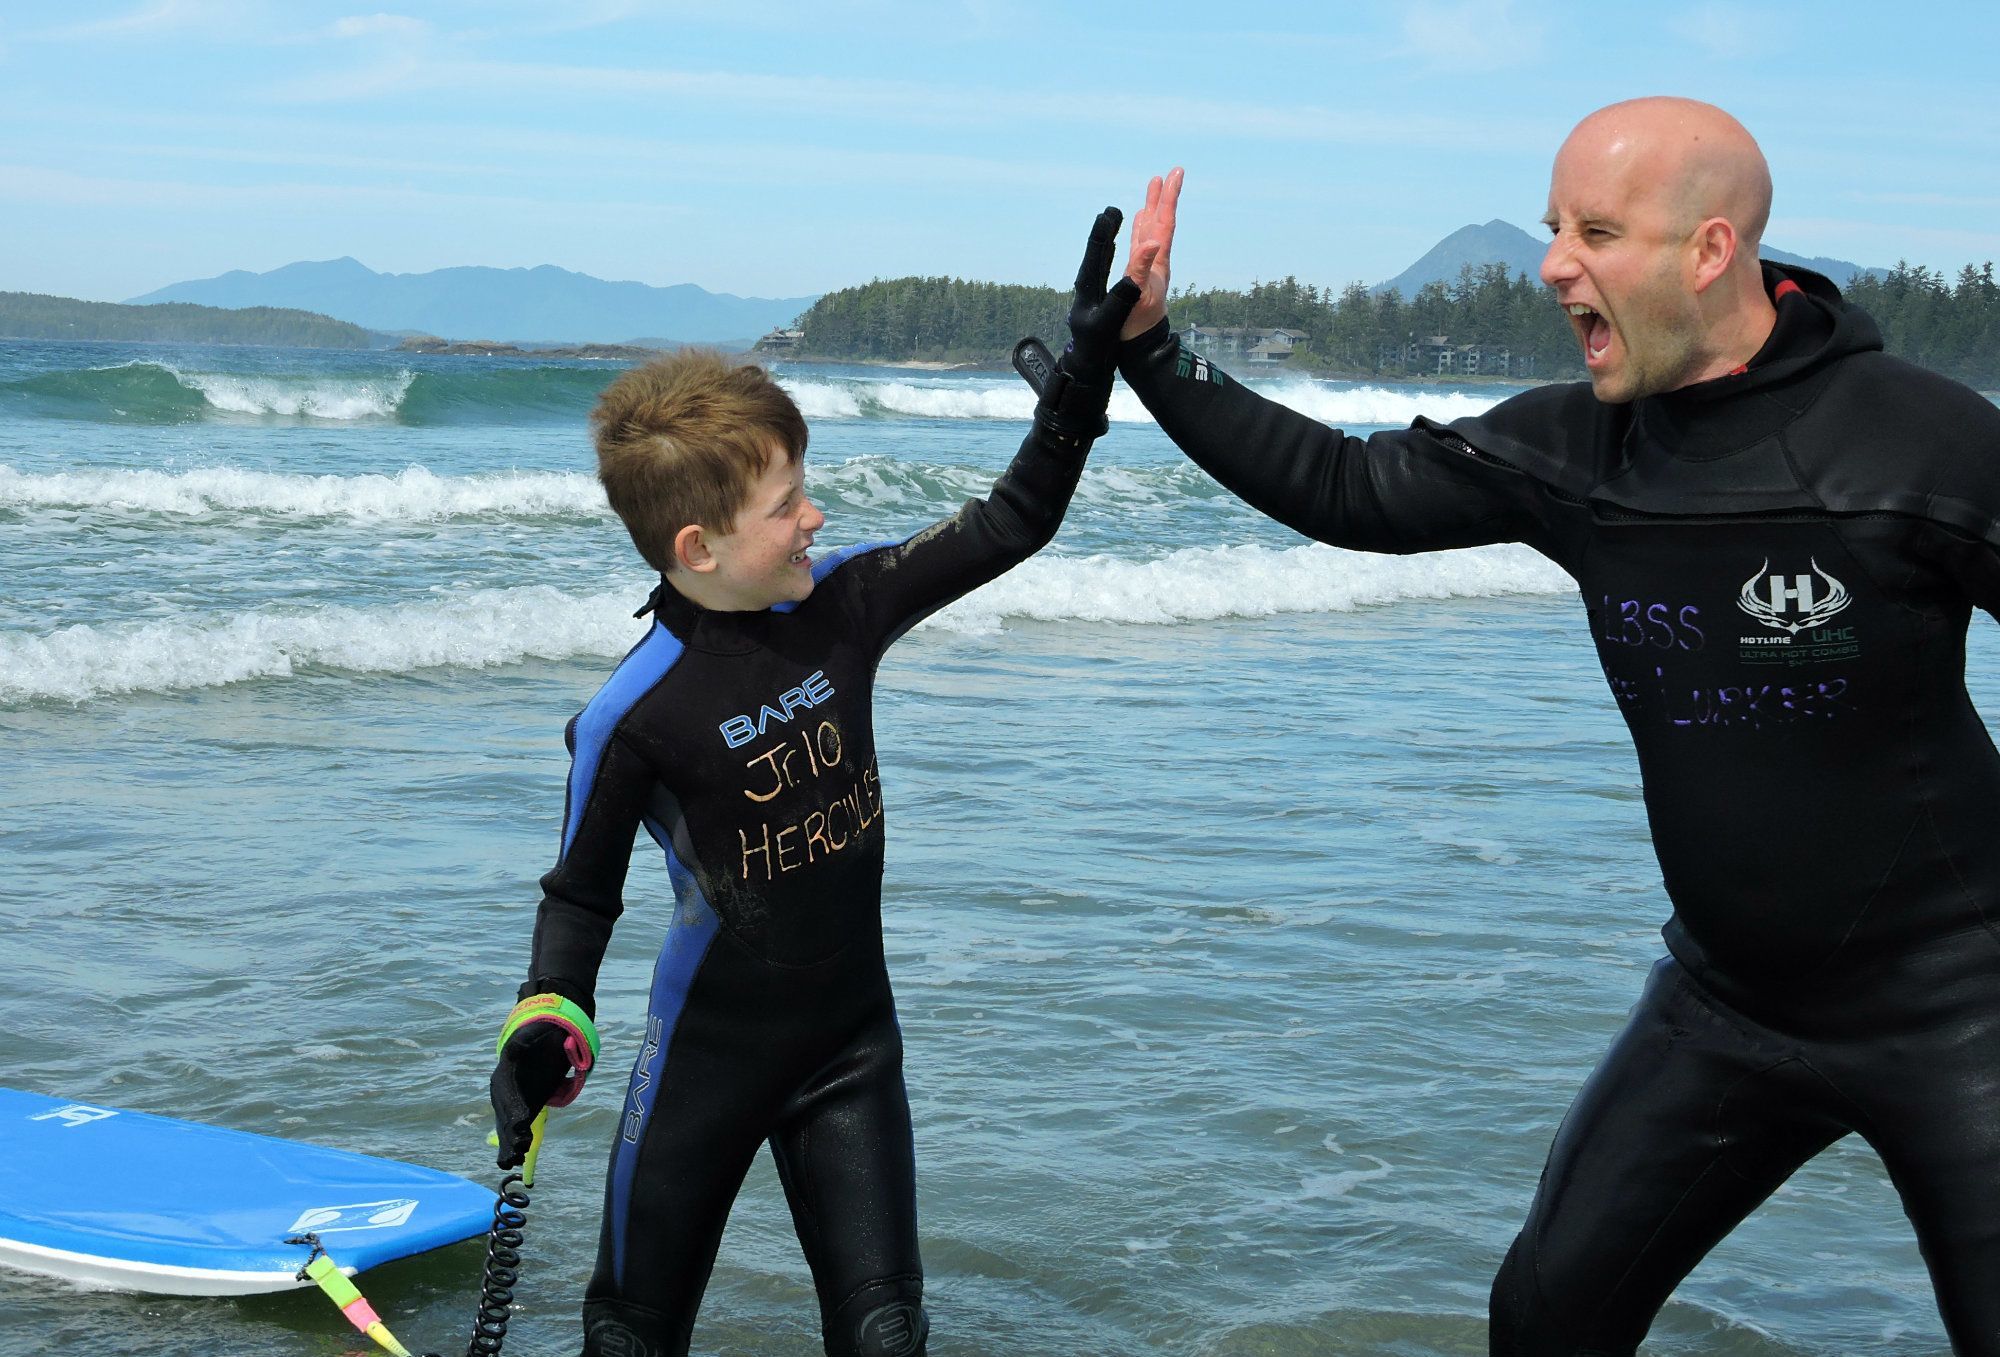 Tofino Wetsuit, where to rent wetsuits in tofino, where to rent surf boards in tofino, Tofino, Vancouver Island serving, Tofino surf rentals, Tofino surf lessons, Tofino Surf Adventures, Long Beach Surf Shop in Tofino, 